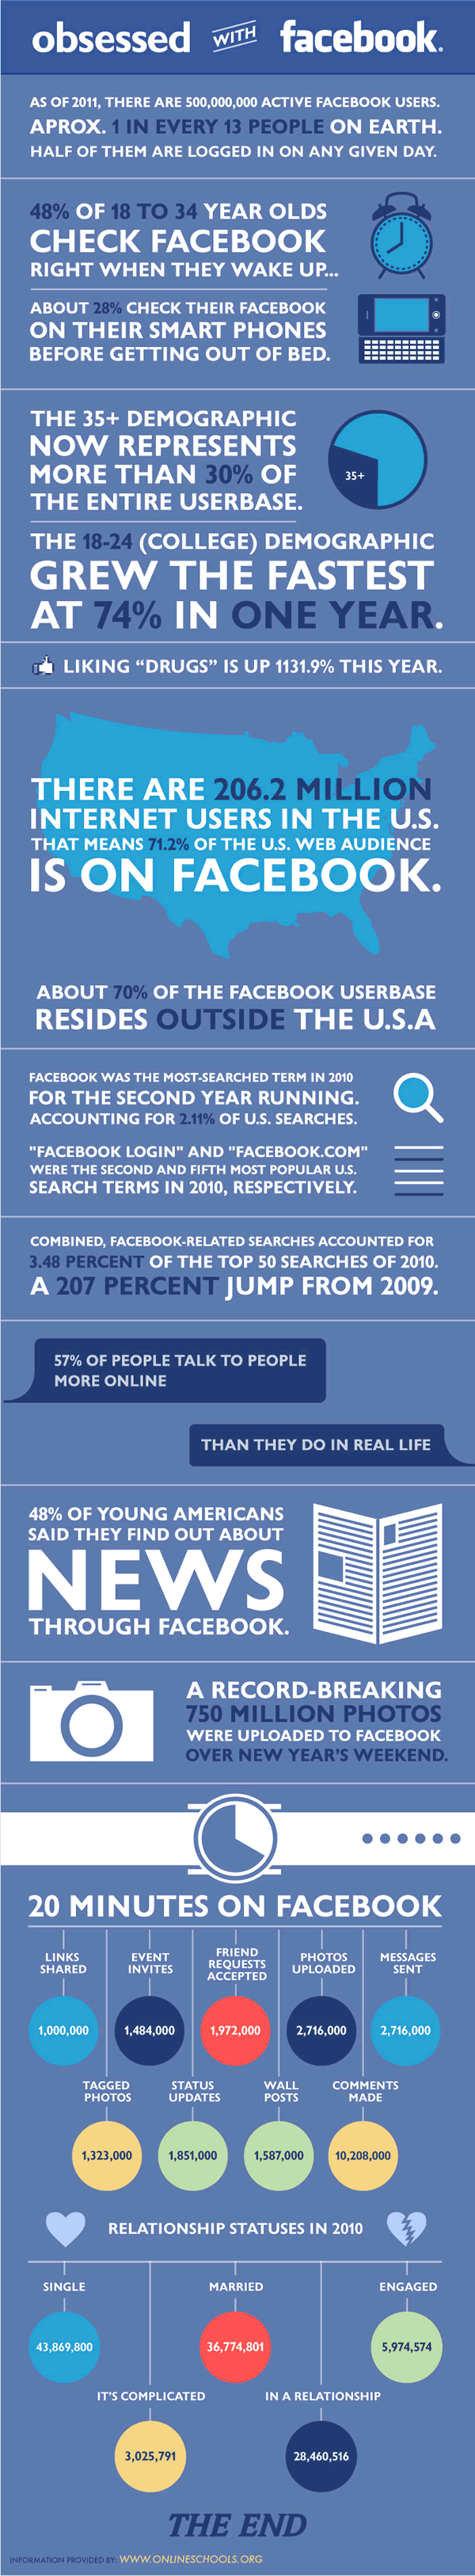 How many people are obsessed with facebook?